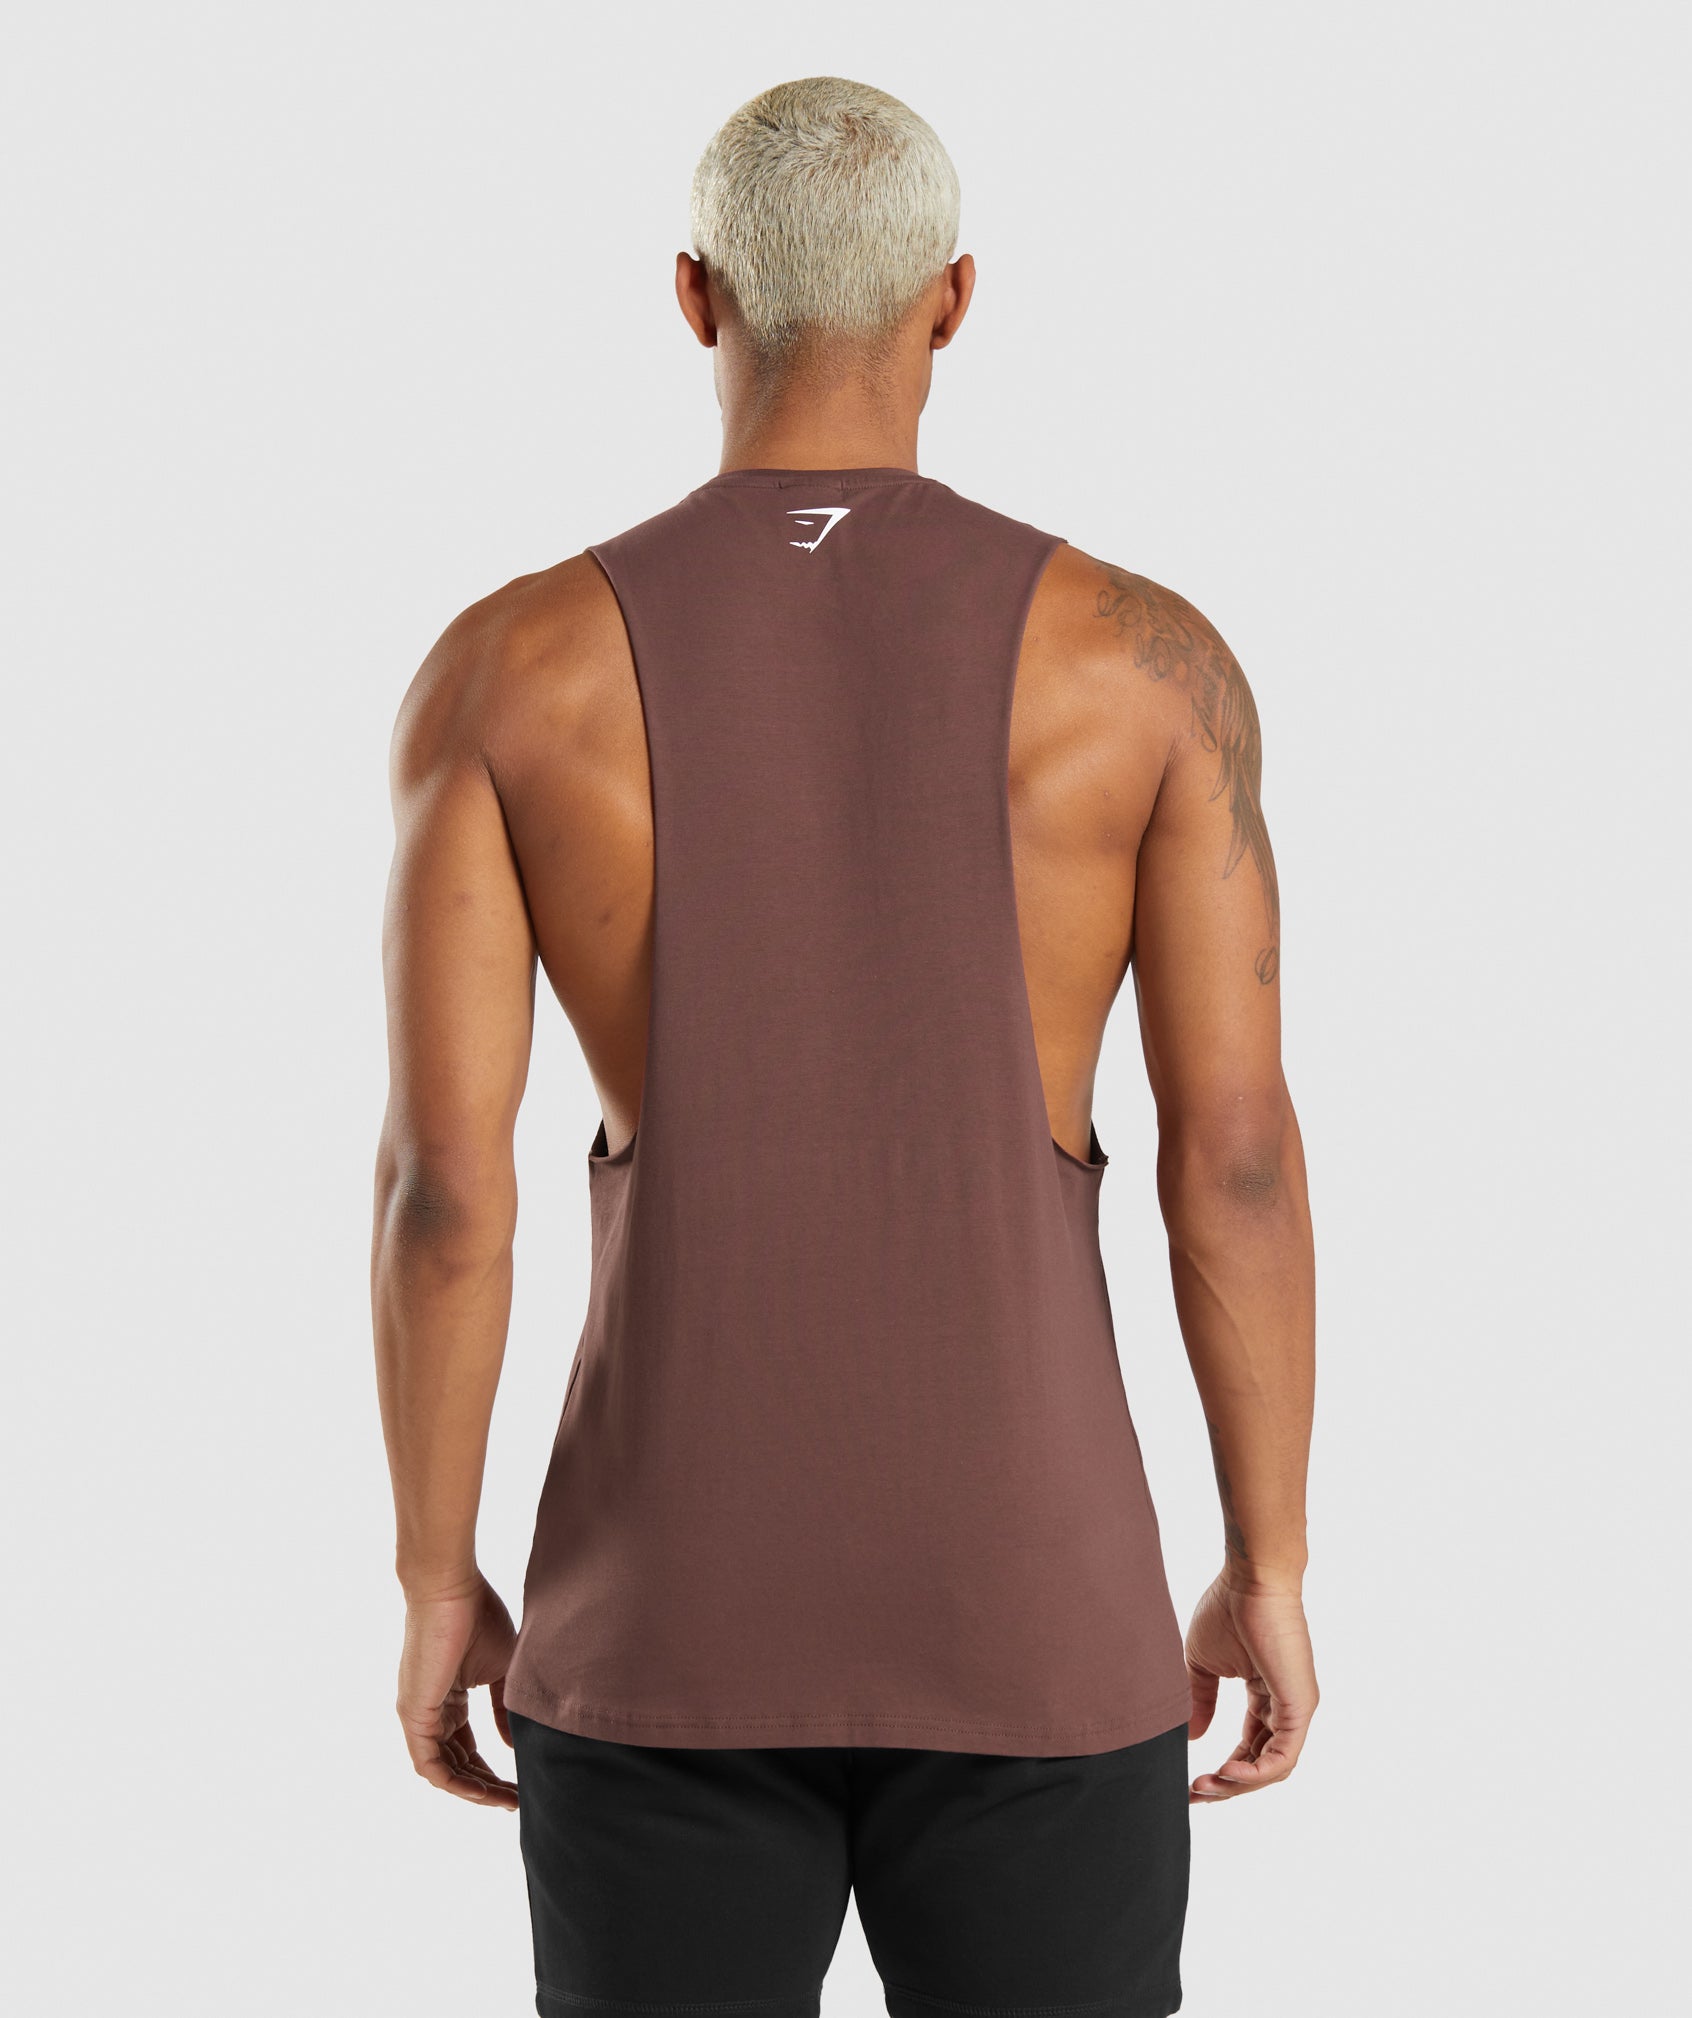 Its All You Drop Arm Tank in Cherry Brown - view 2